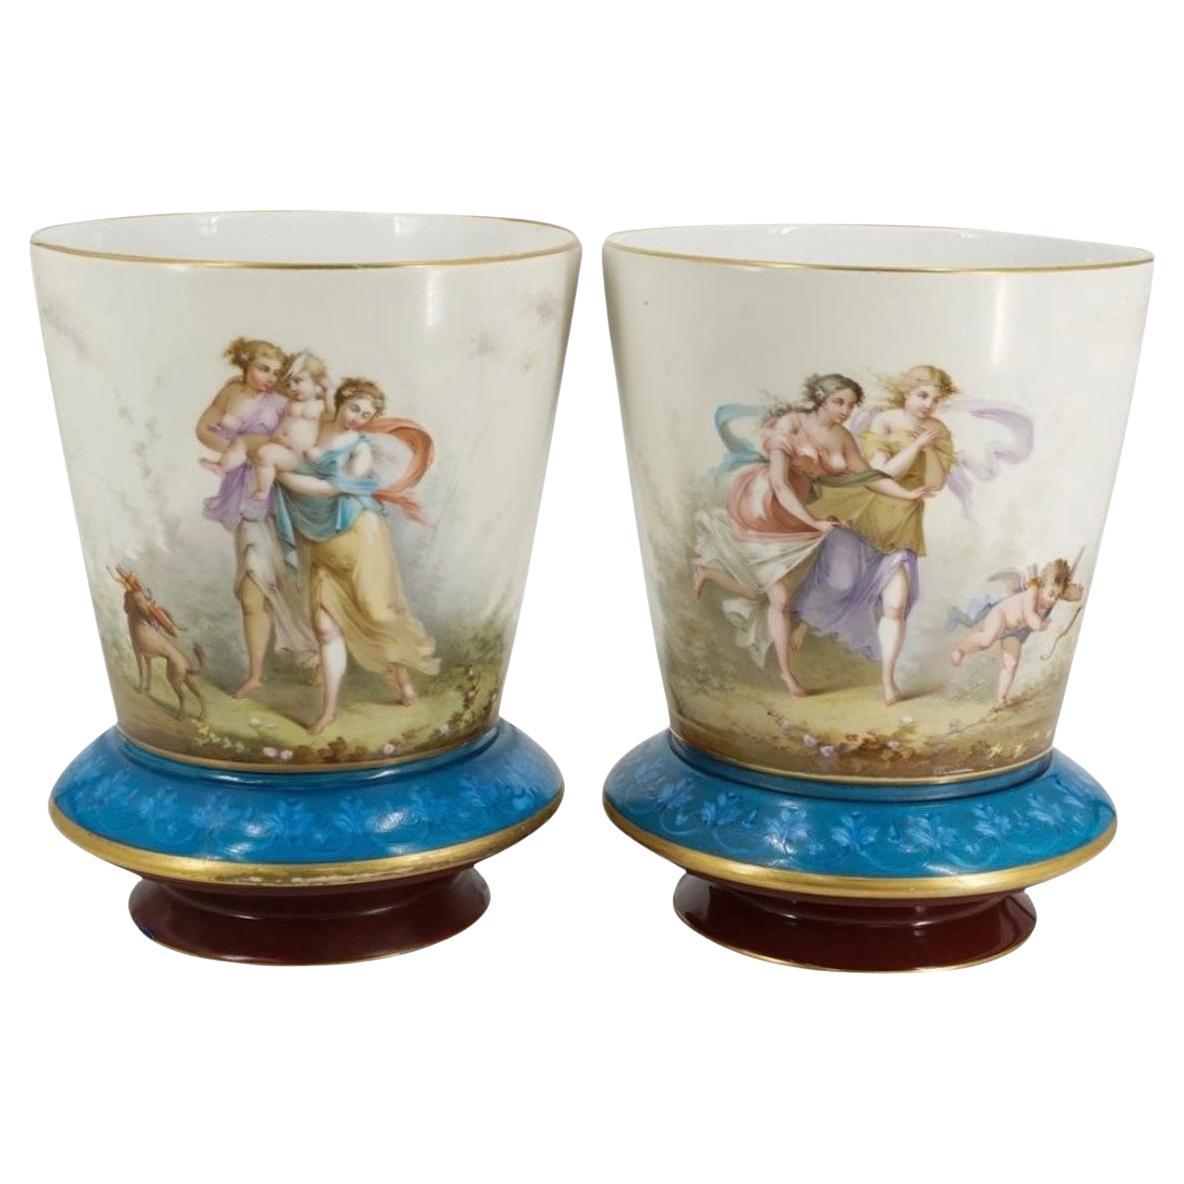 Baccarat Enameled Opaline Glass Jardinieres Cachepots / Vases For Sale